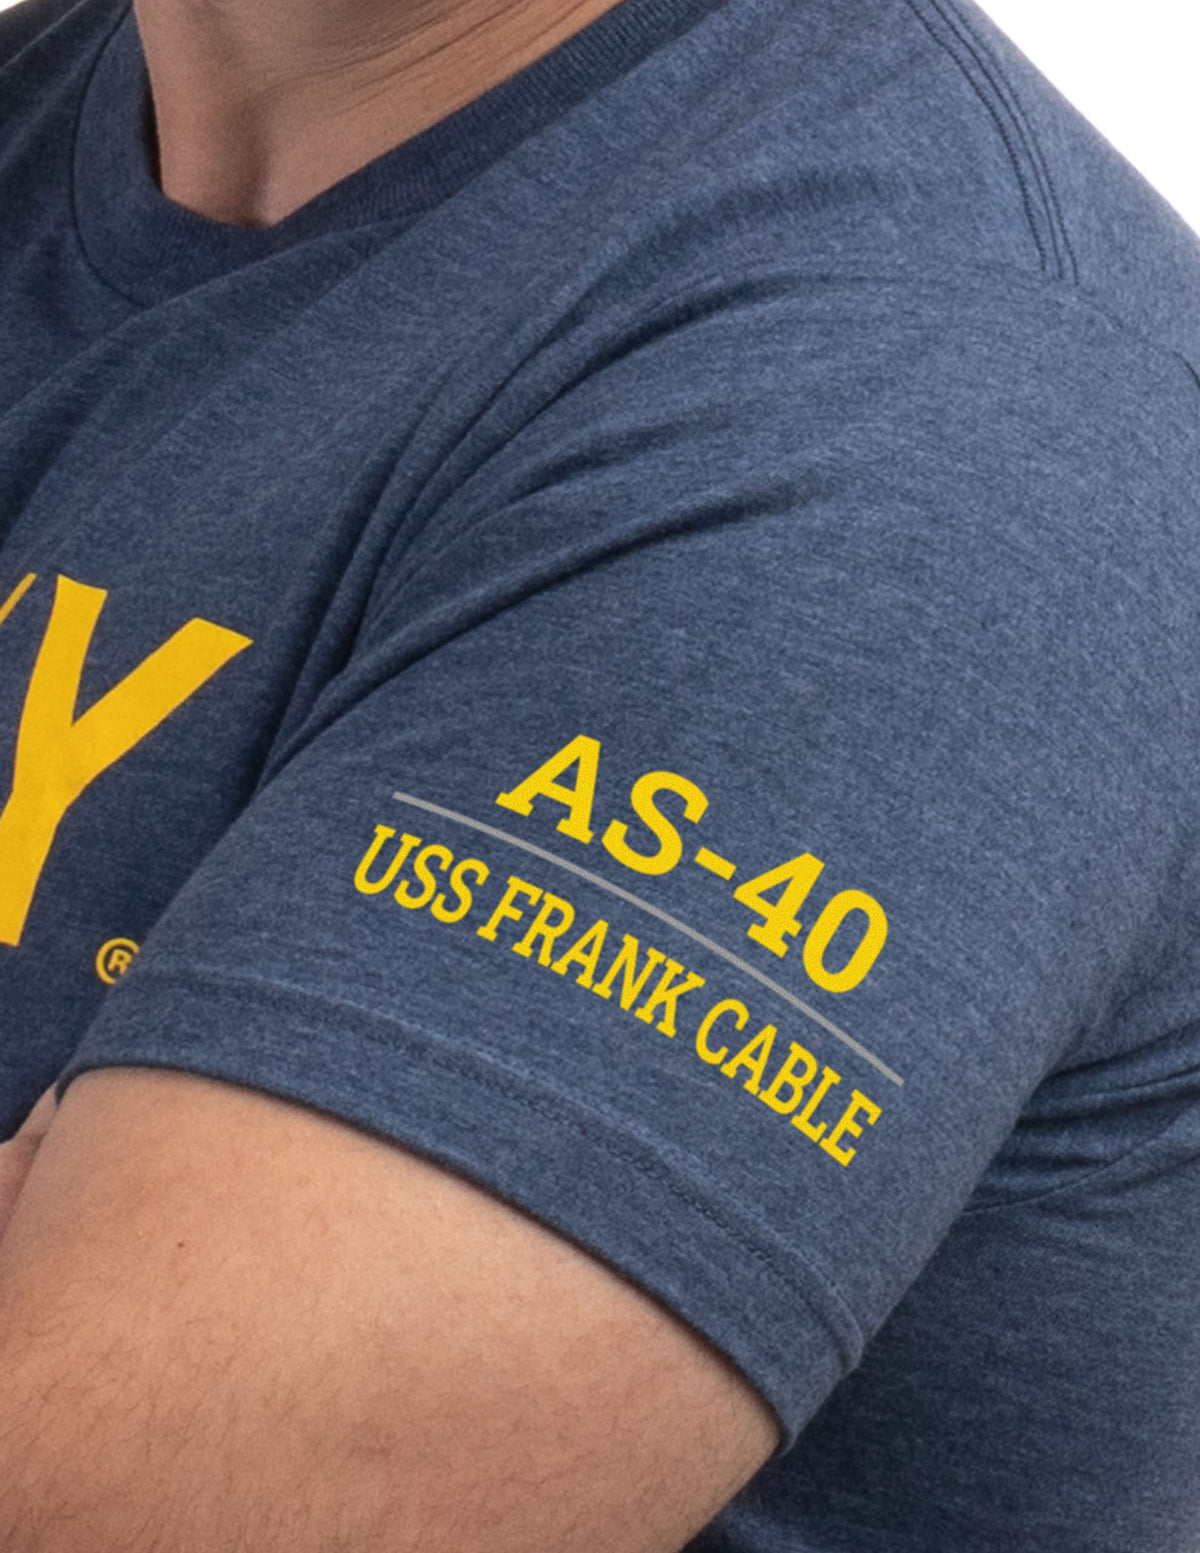 USS Frank Cable, AS-40 | U.S. Navy Sailor Veteran USN United States Naval T-shirt for Men Women